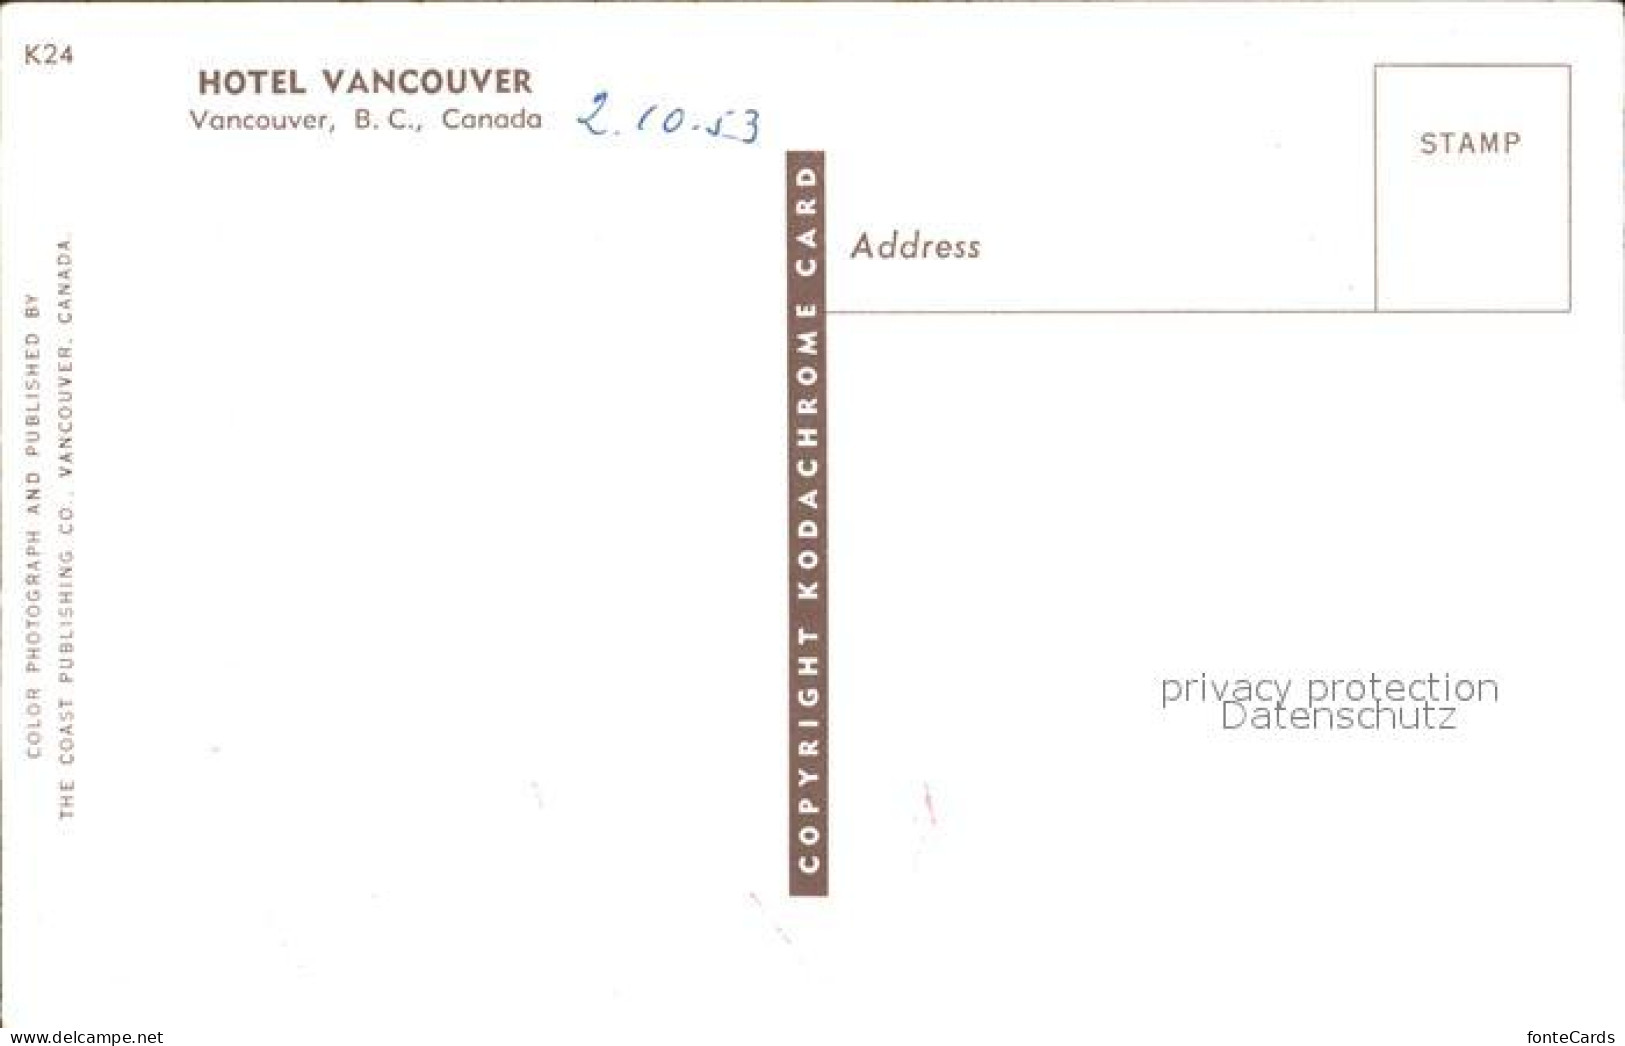 72119183 Vancouver British Columbia Hotel Vancouver Vancouver - Unclassified